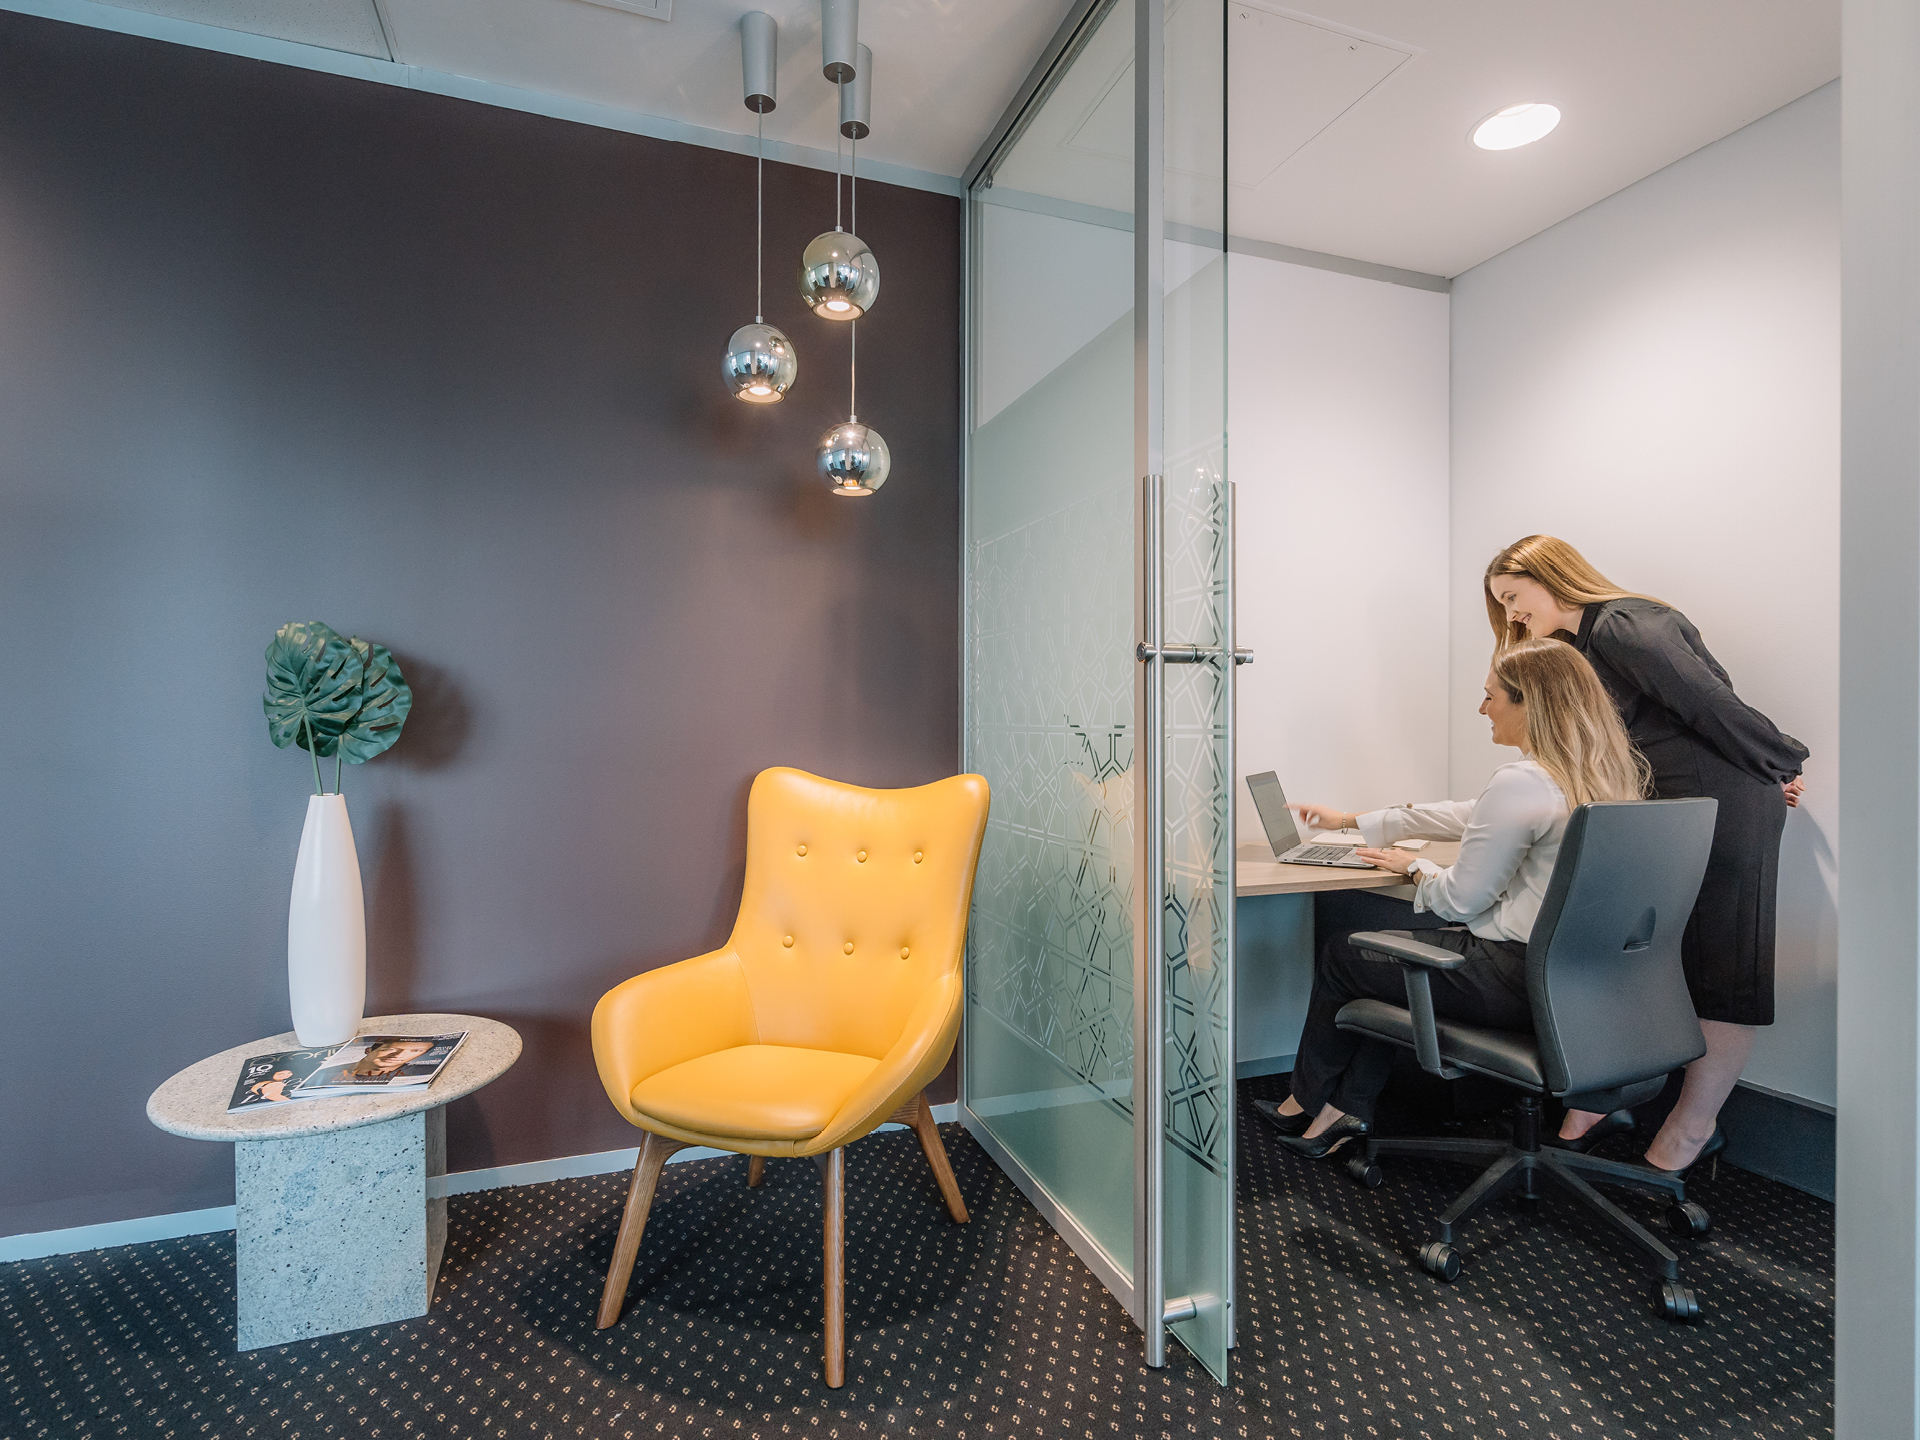 Private 2-person workspace with access to Coworking breakout areas